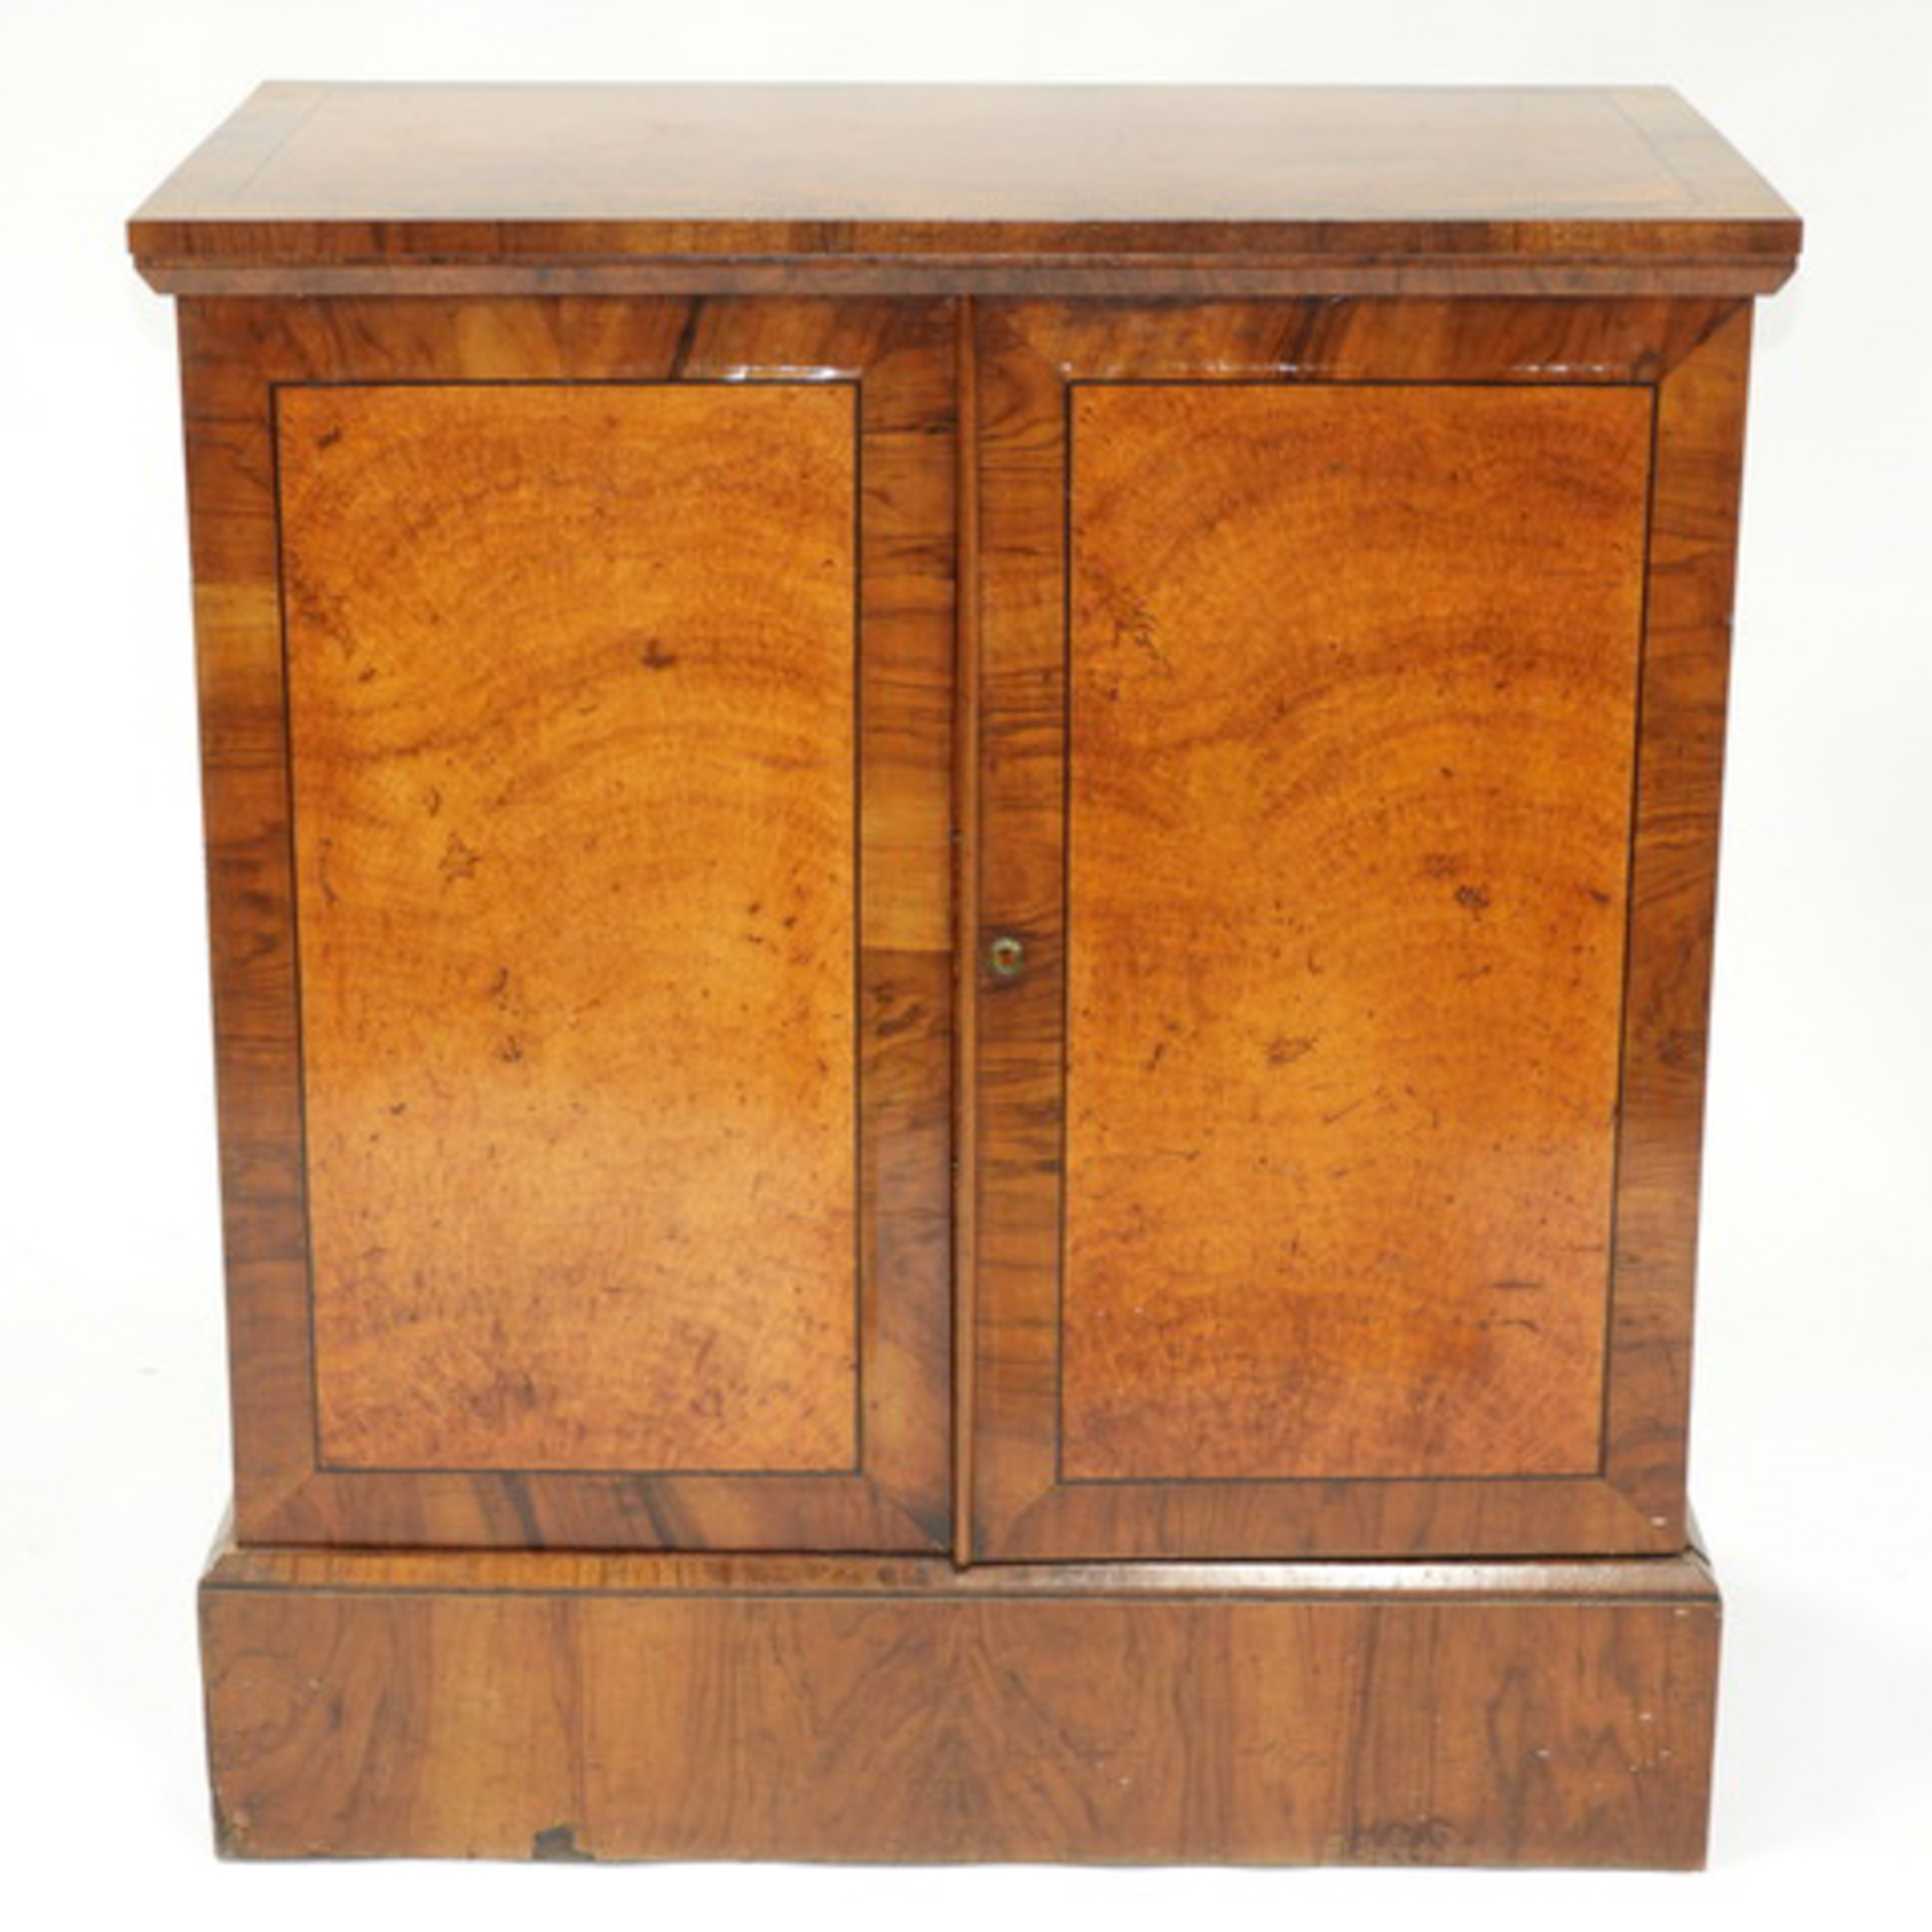 Rosewood and Burl Walnut Chest of Drawers